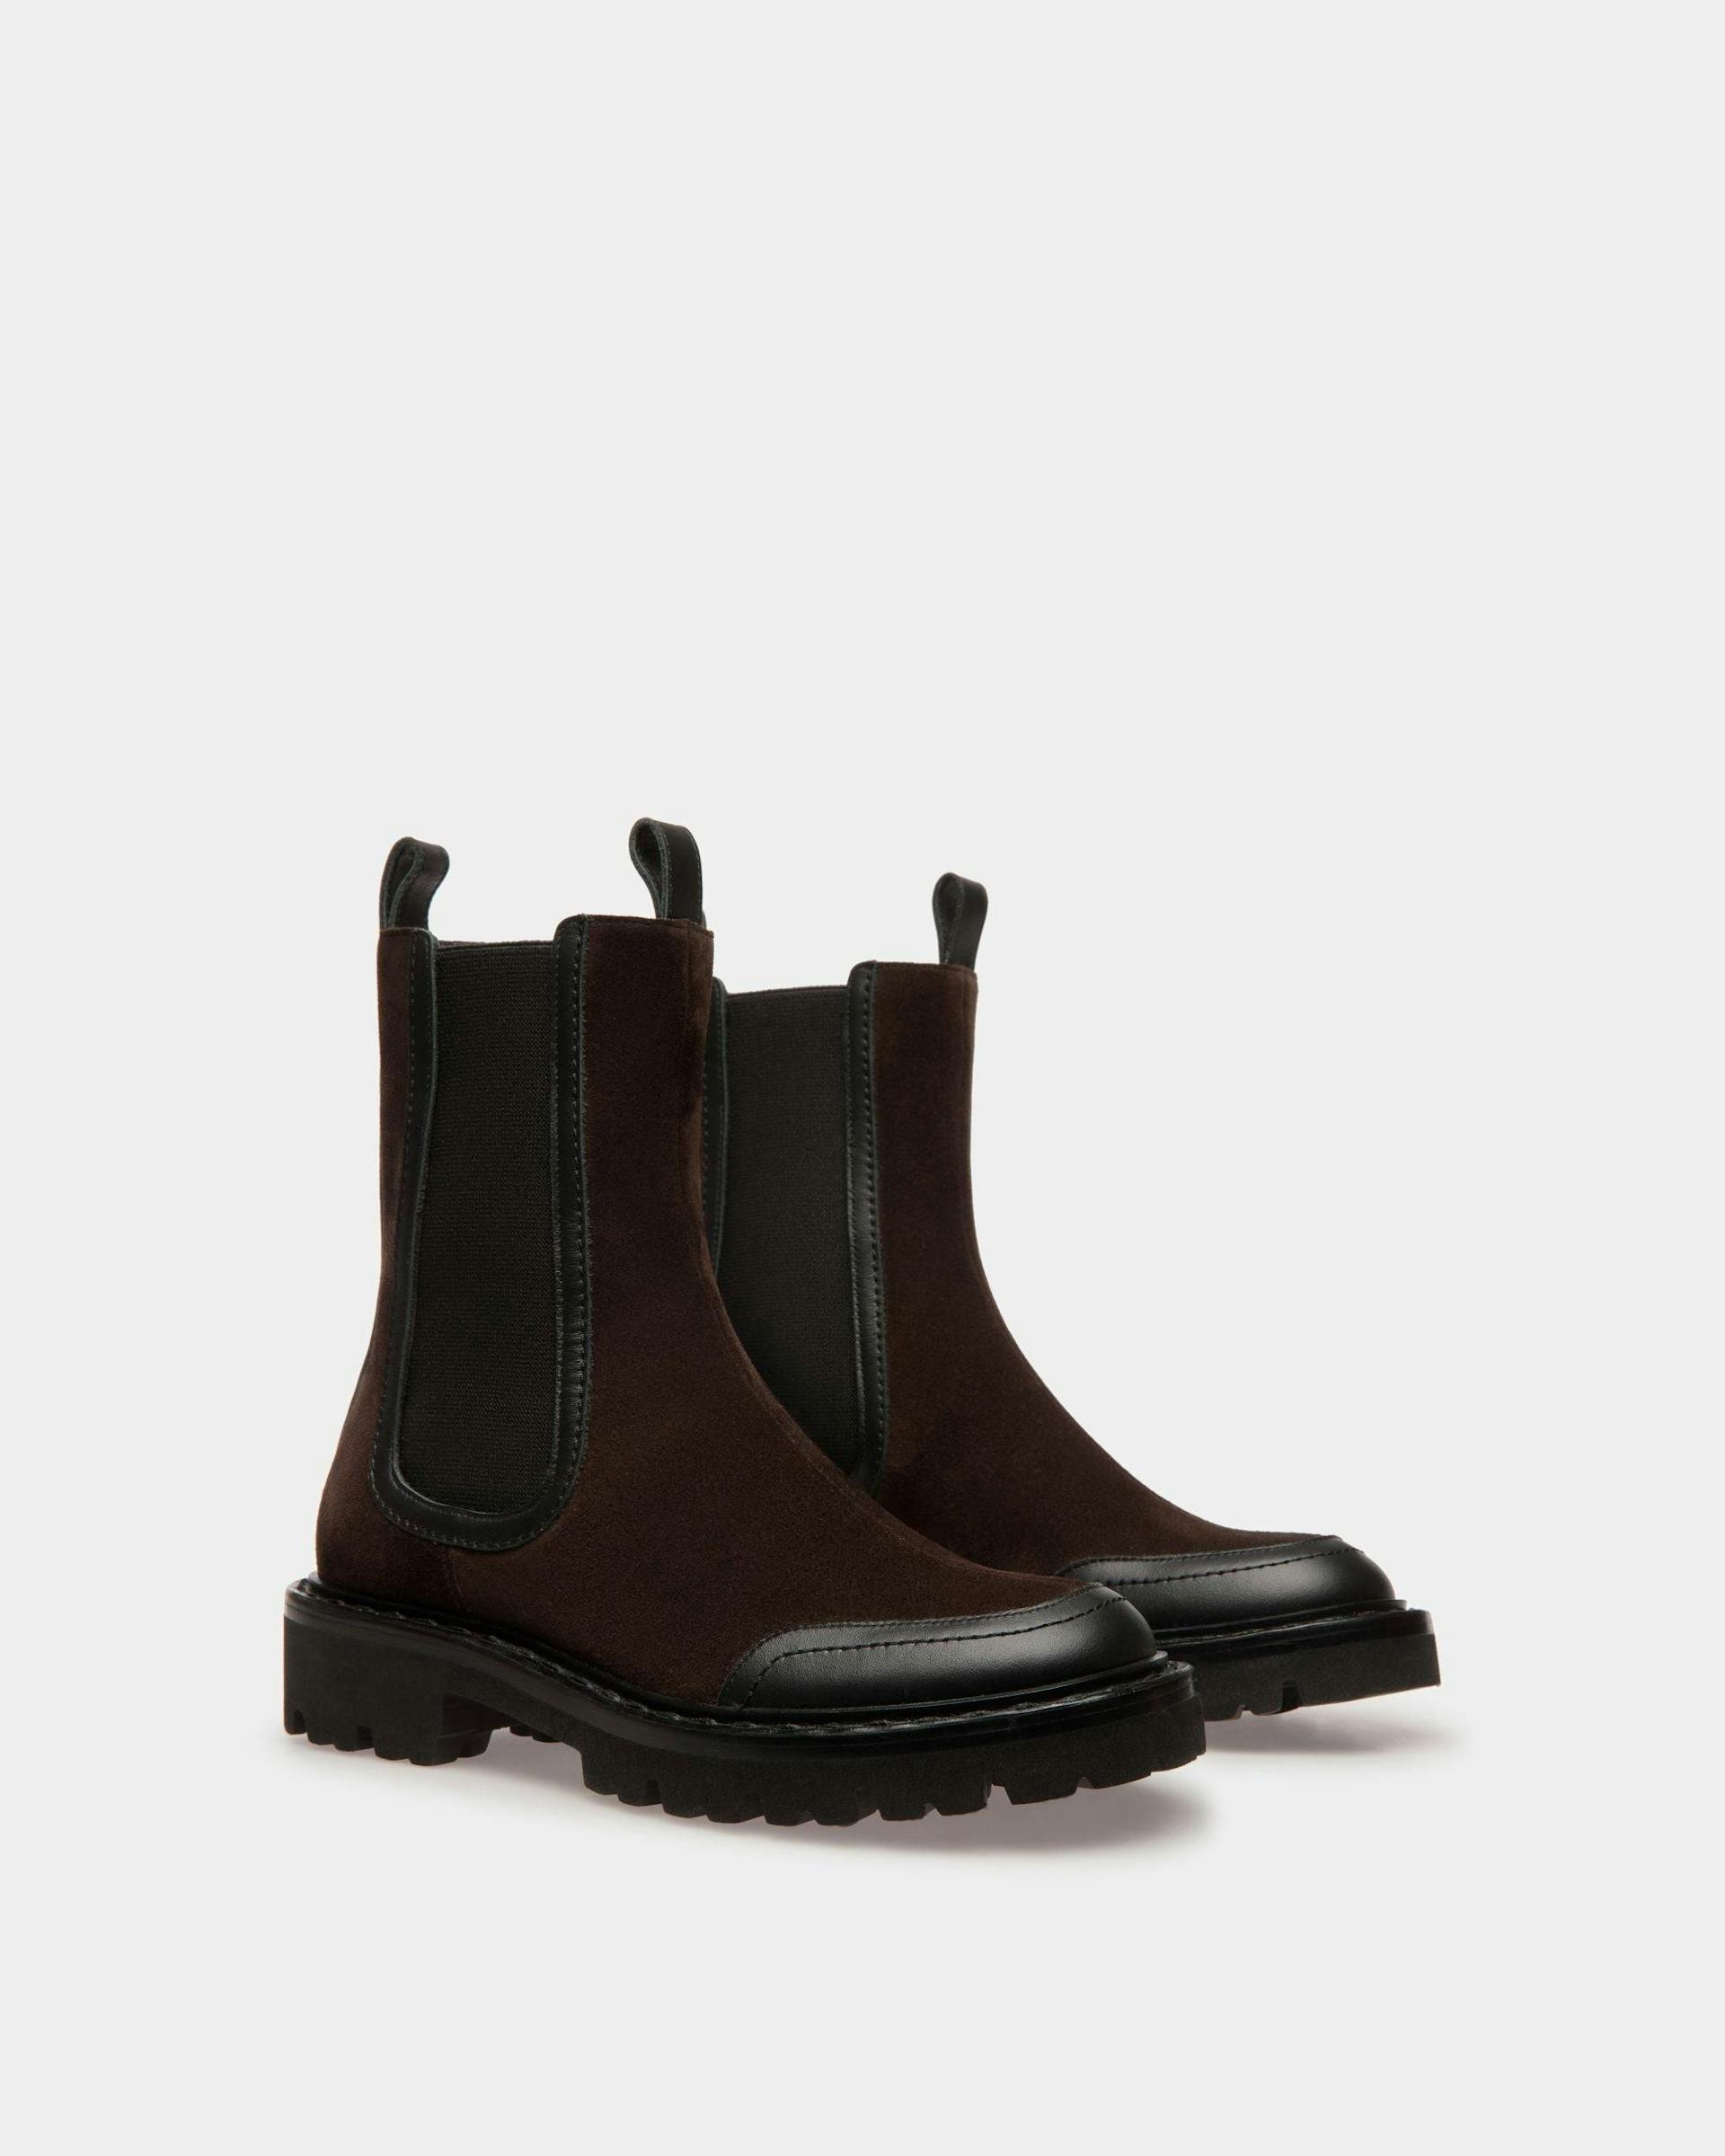 Women's Enga Boots In Brown Leather | Bally | Still Life 3/4 Front